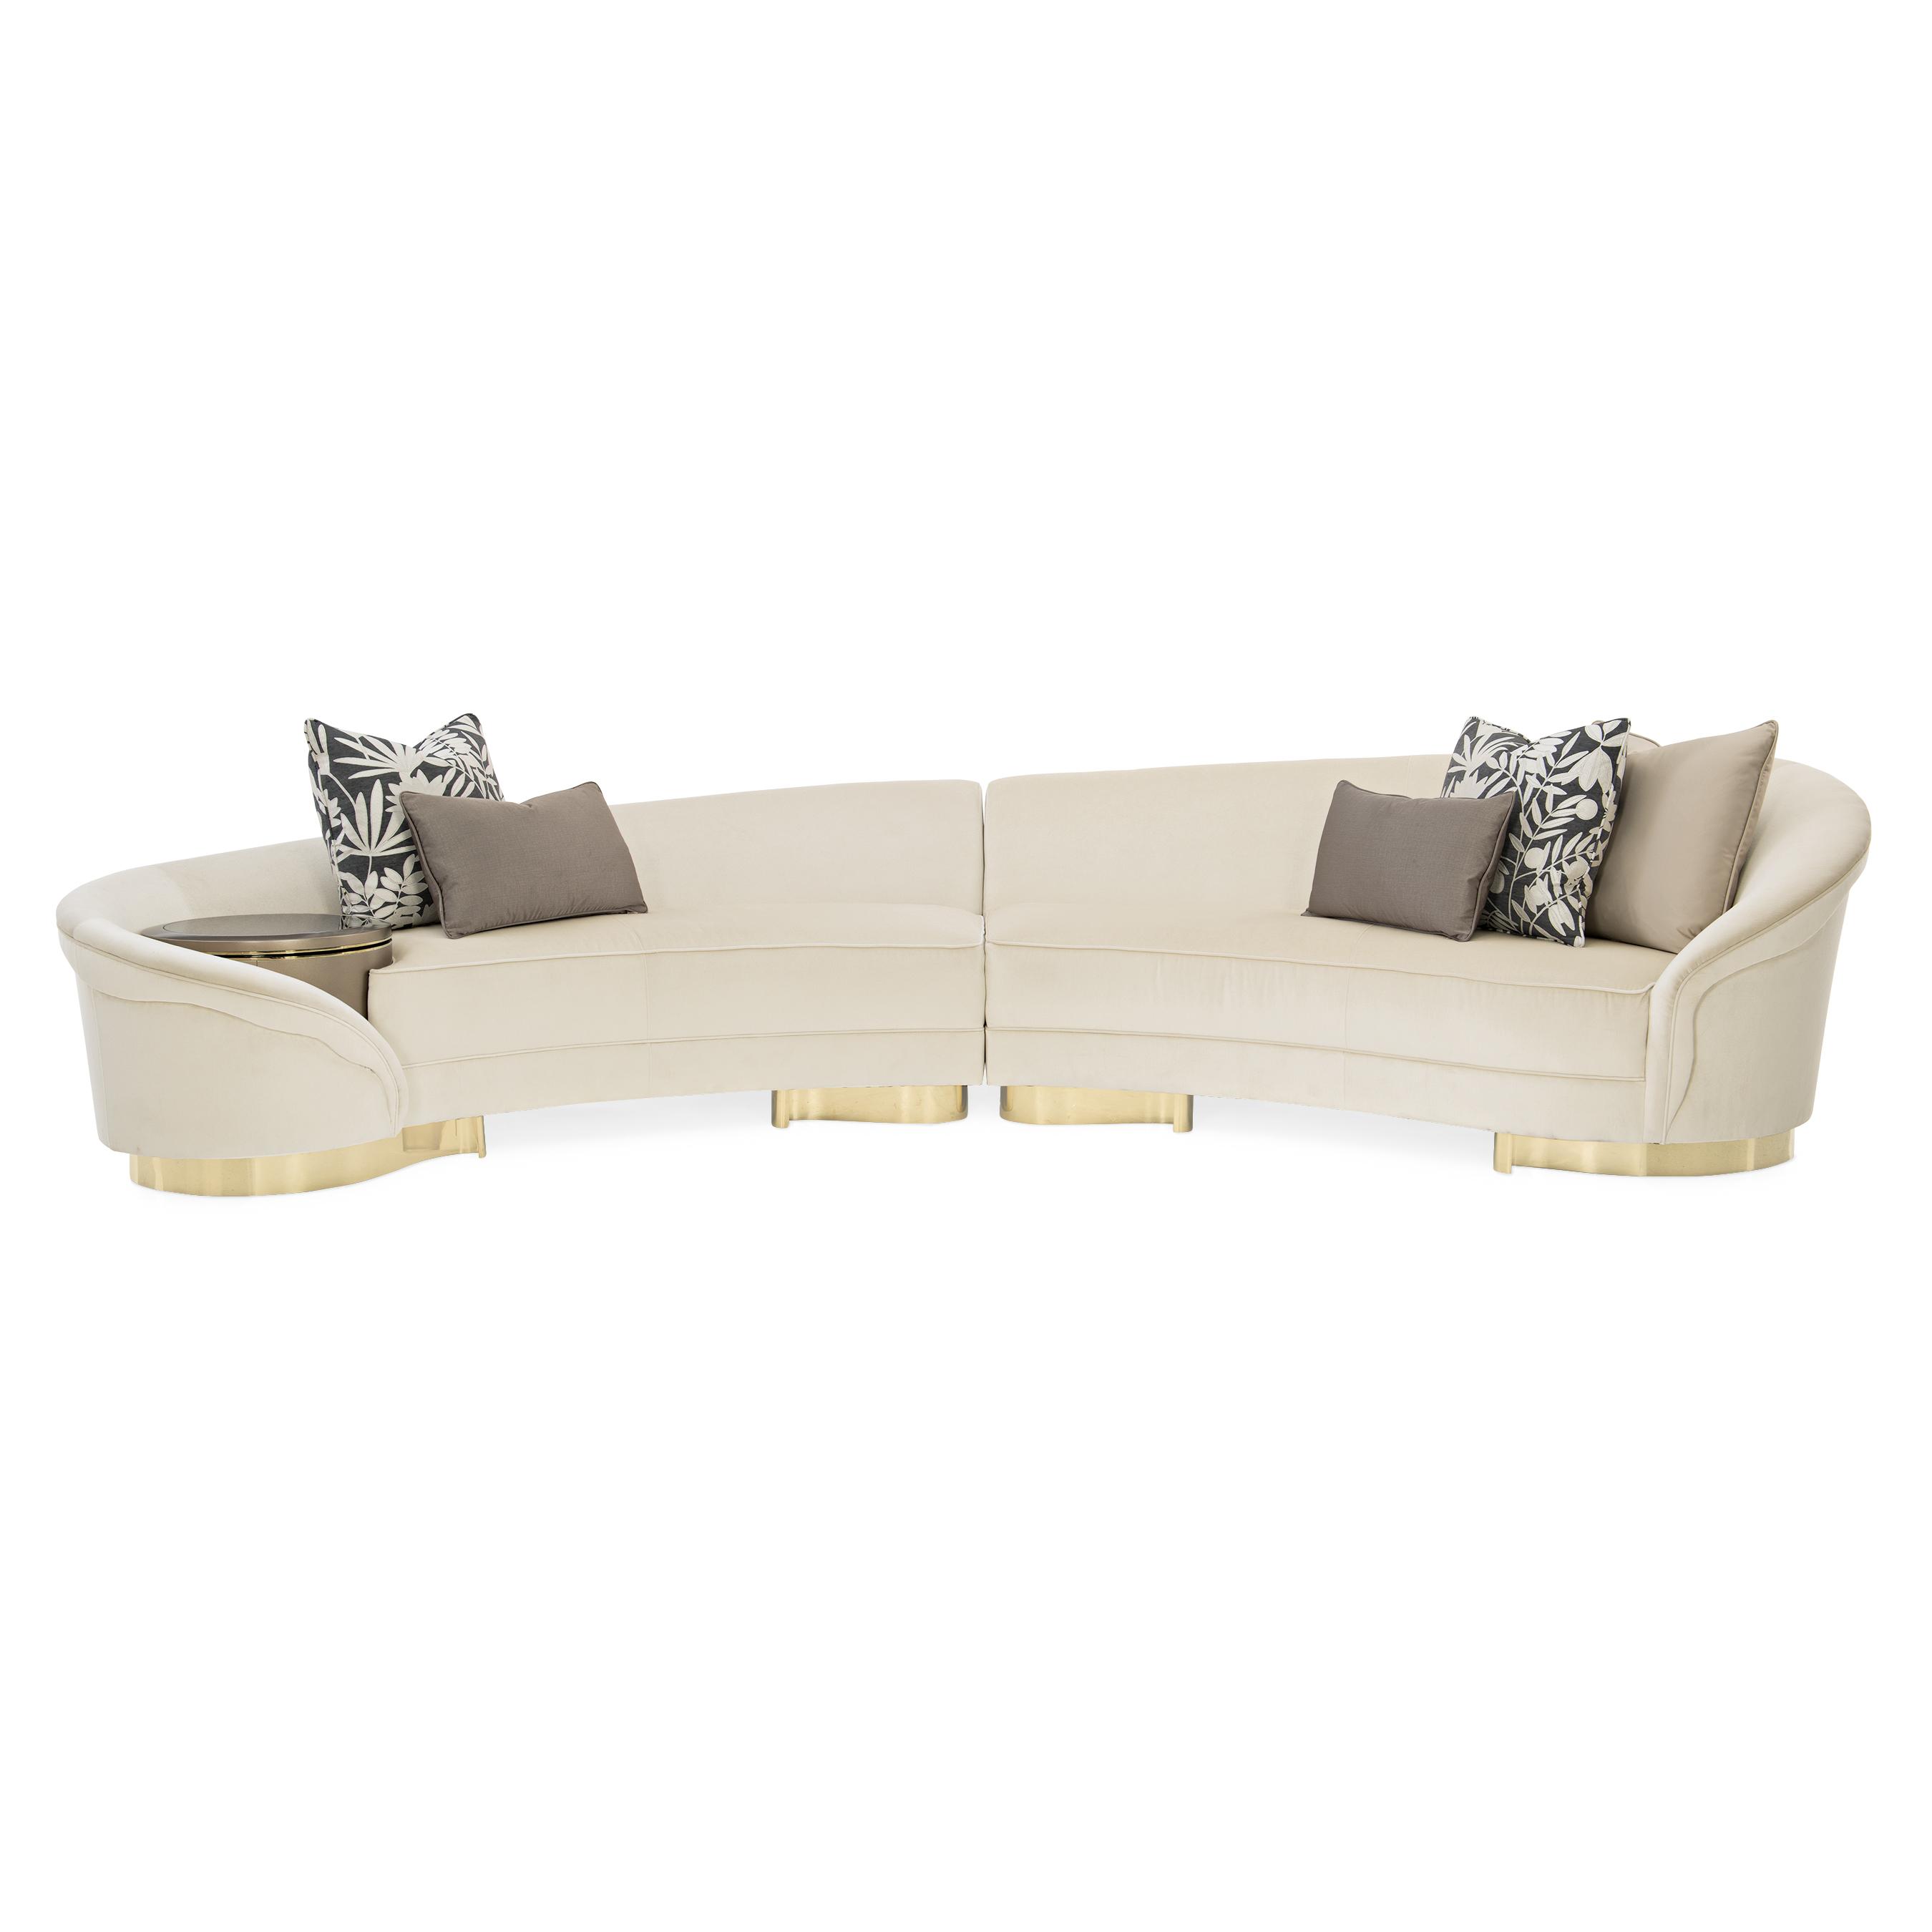 Contemporary Sectional Sofa Grand Opening UPH-419-SEC1-A in Cream, Gold Fabric